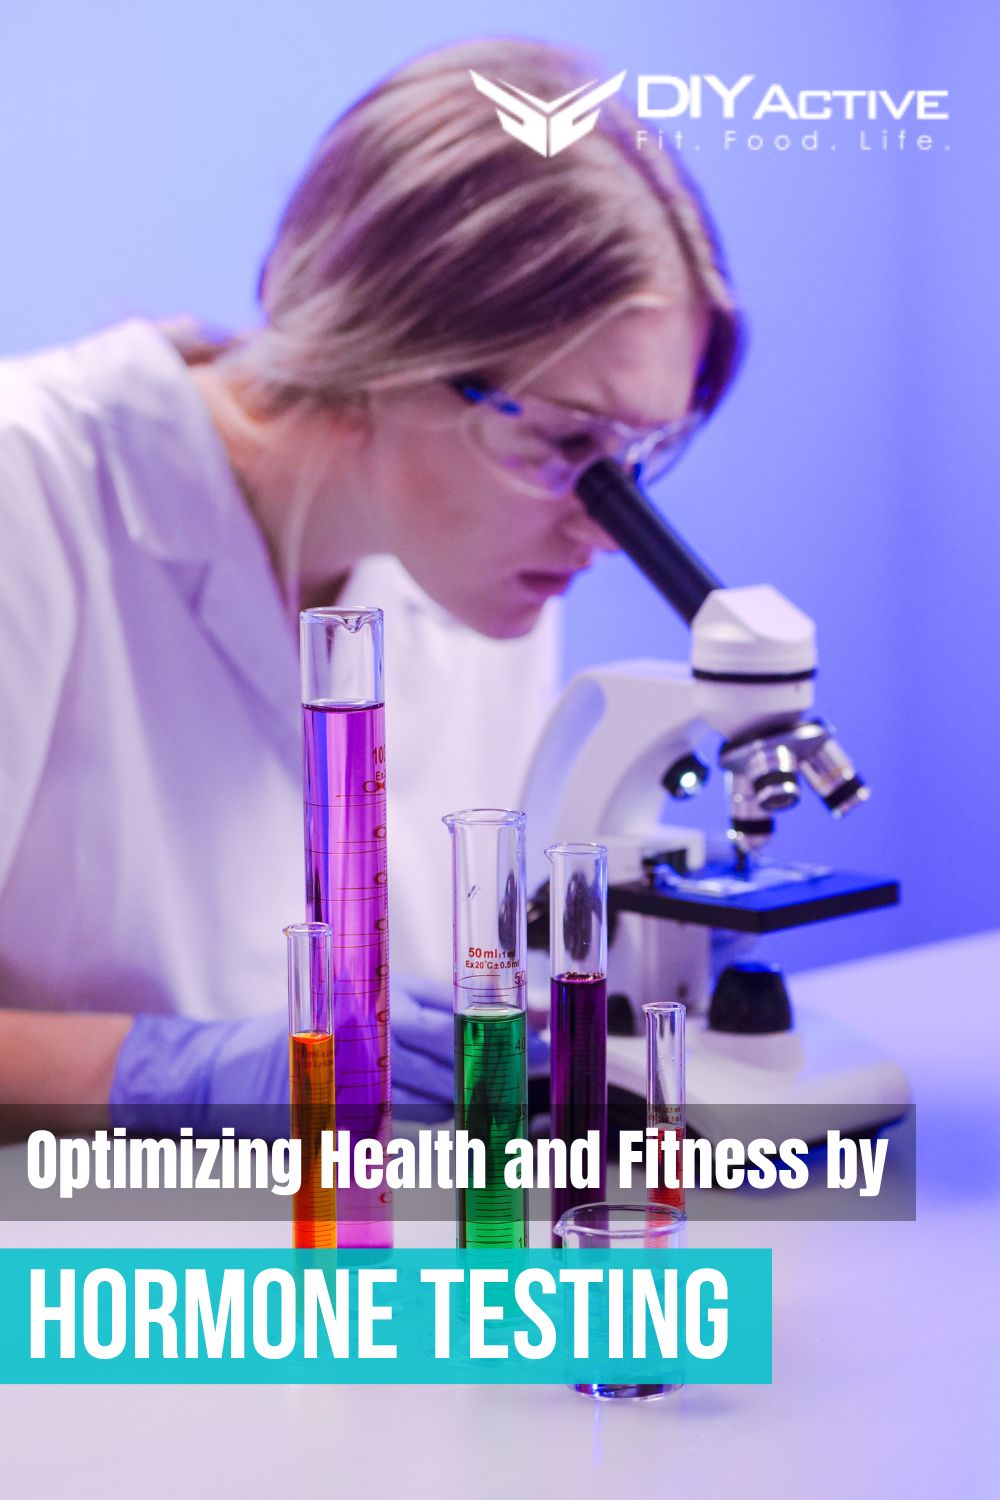 Hormone Testing As A Tool For Optimizing Health and Fitness 2